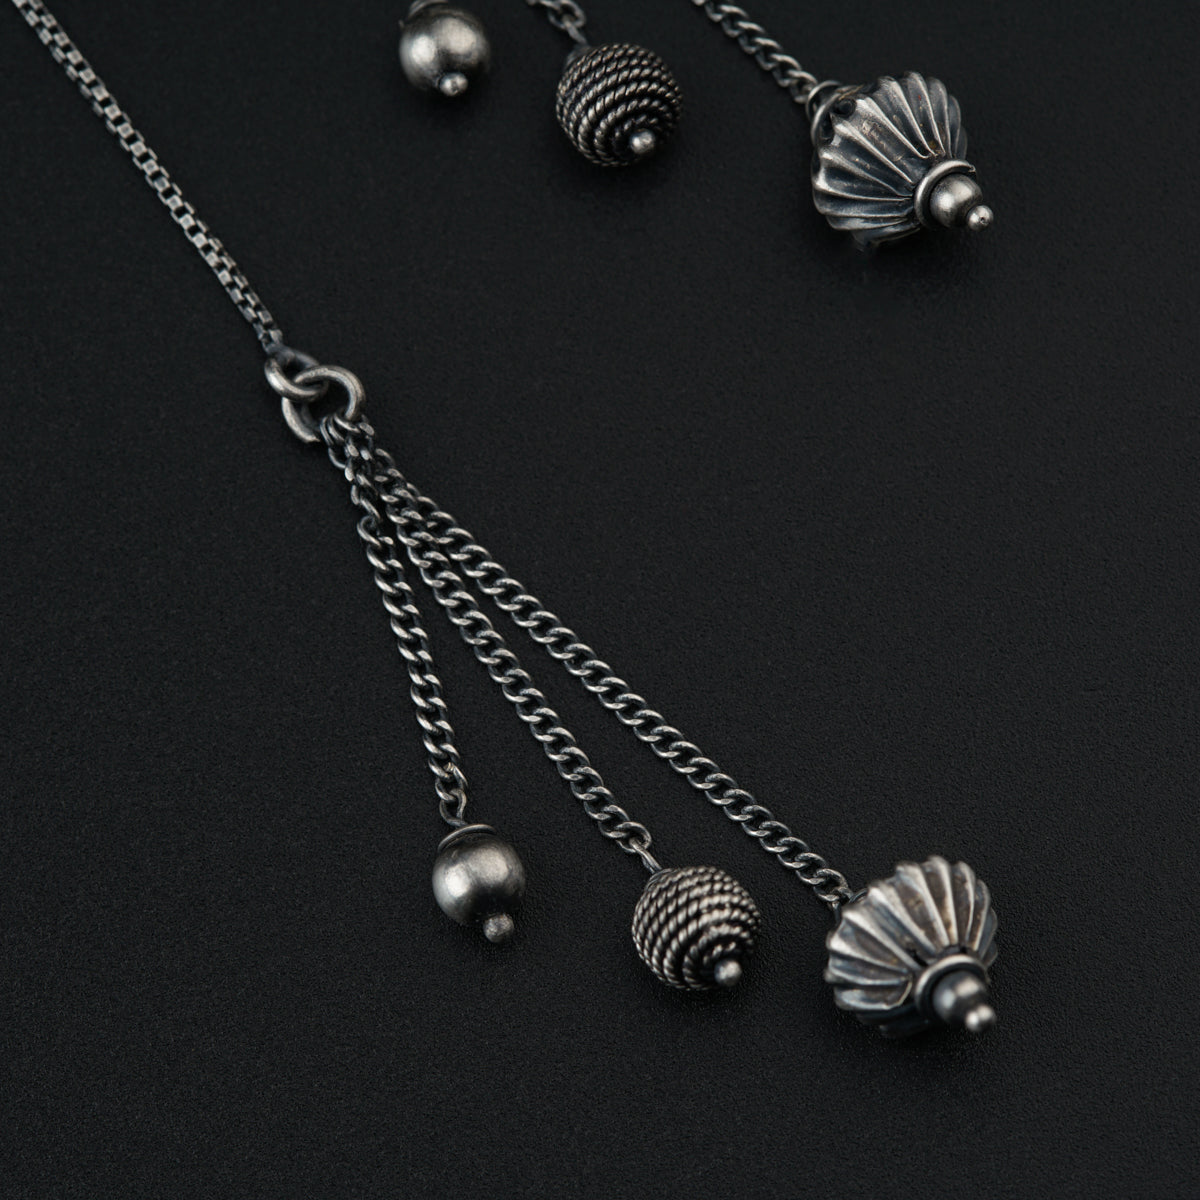 a close up of a necklace and earrings on a black surface